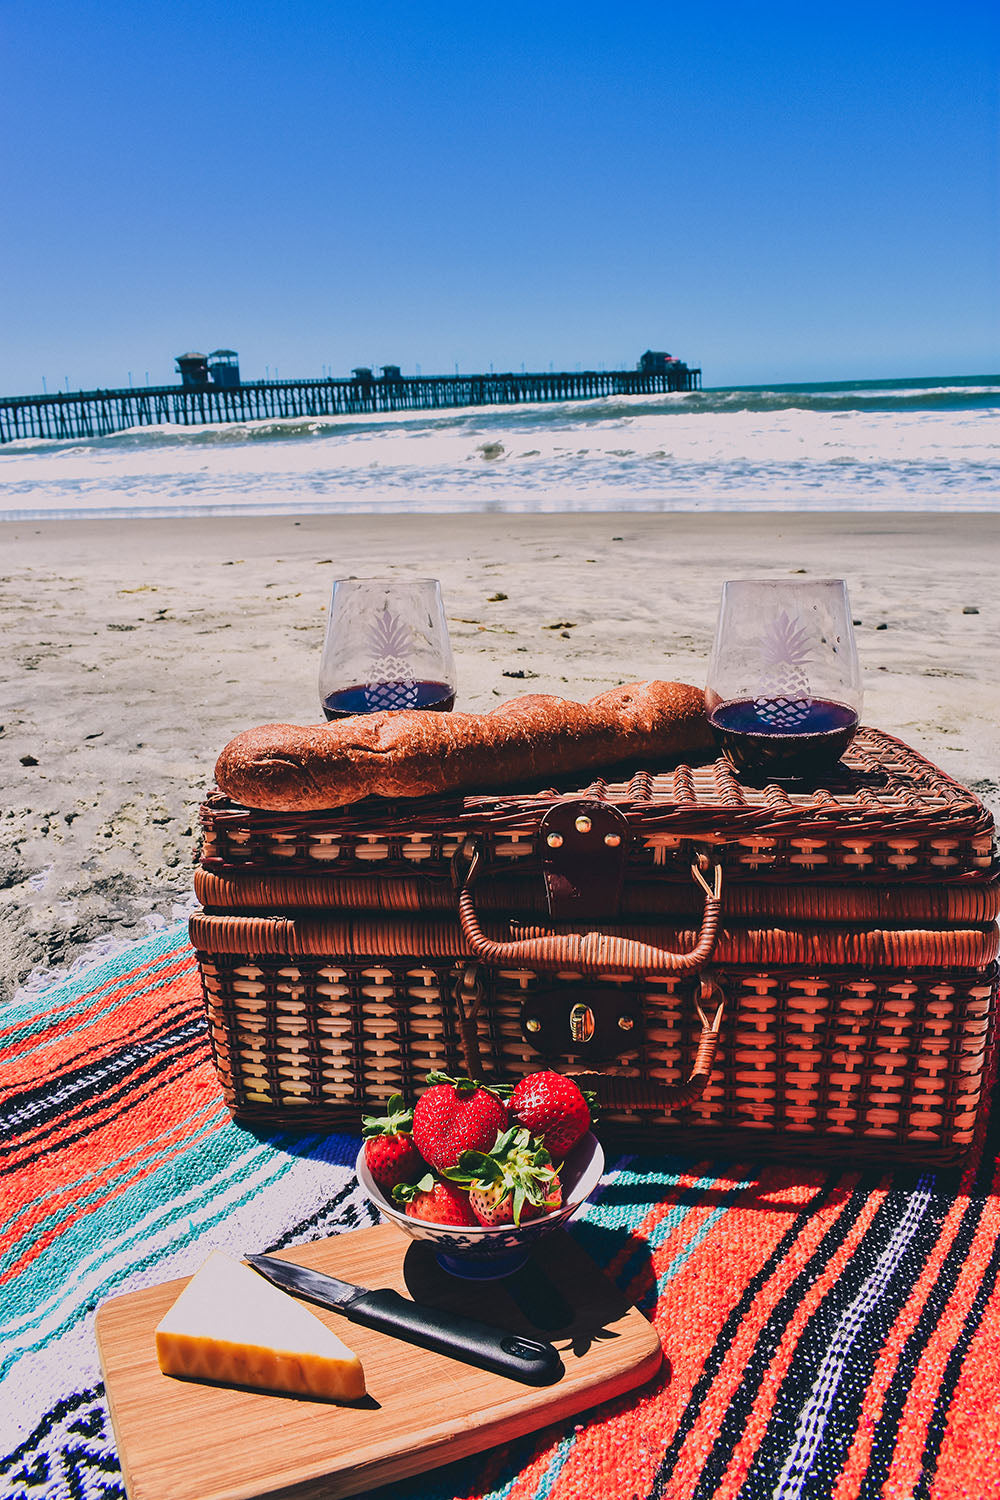 What would summer be with out a little summer lovin? Treat your other half to a romantic outdoor picnic for two. We love a picnic on the beach, basking in the warm sunshine. A good bottle of vino and a few munchies are all you need for a romantic beach rendezvous.